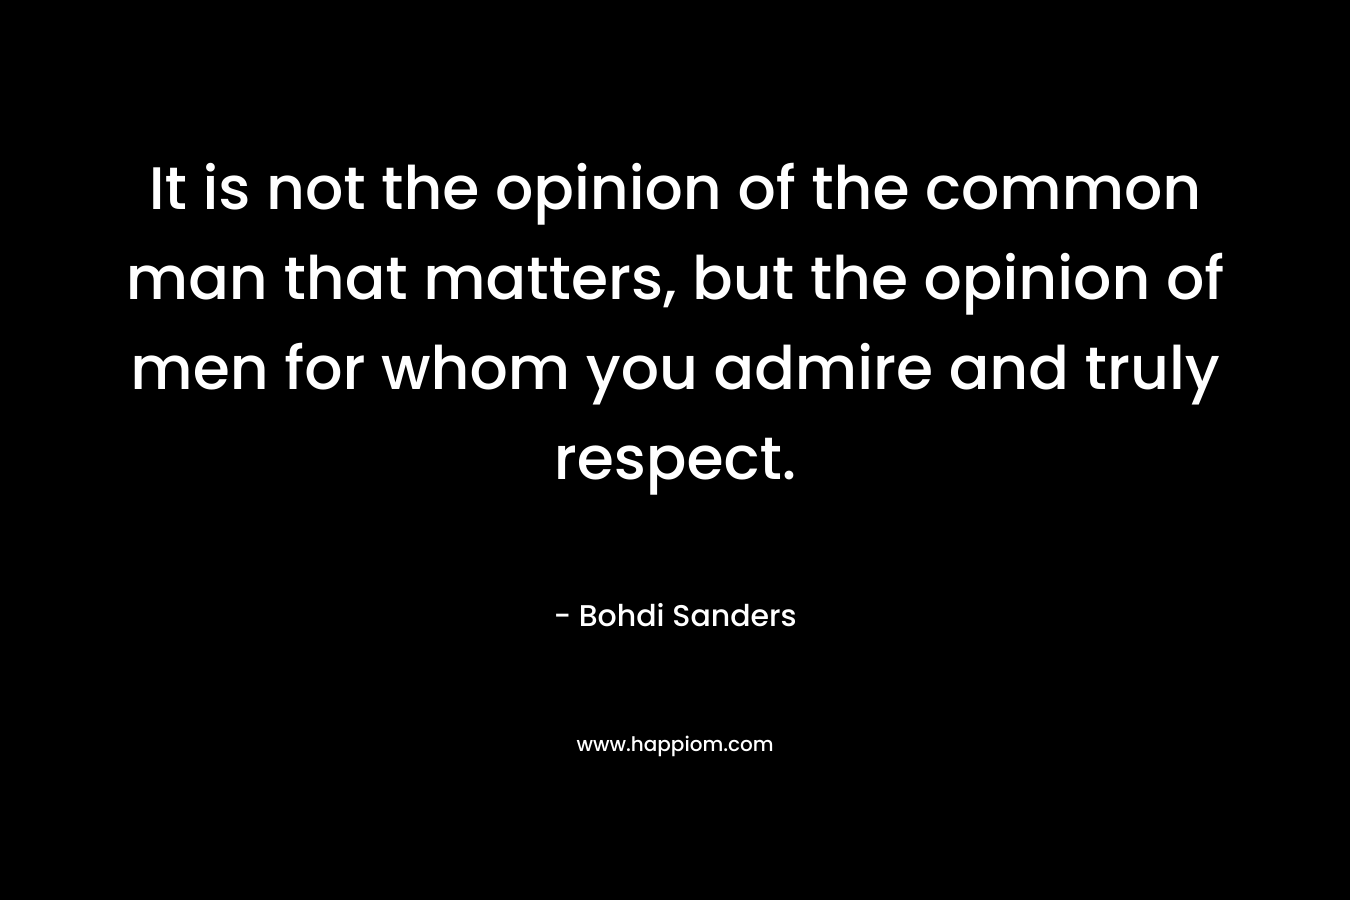 It is not the opinion of the common man that matters, but the opinion of men for whom you admire and truly respect.